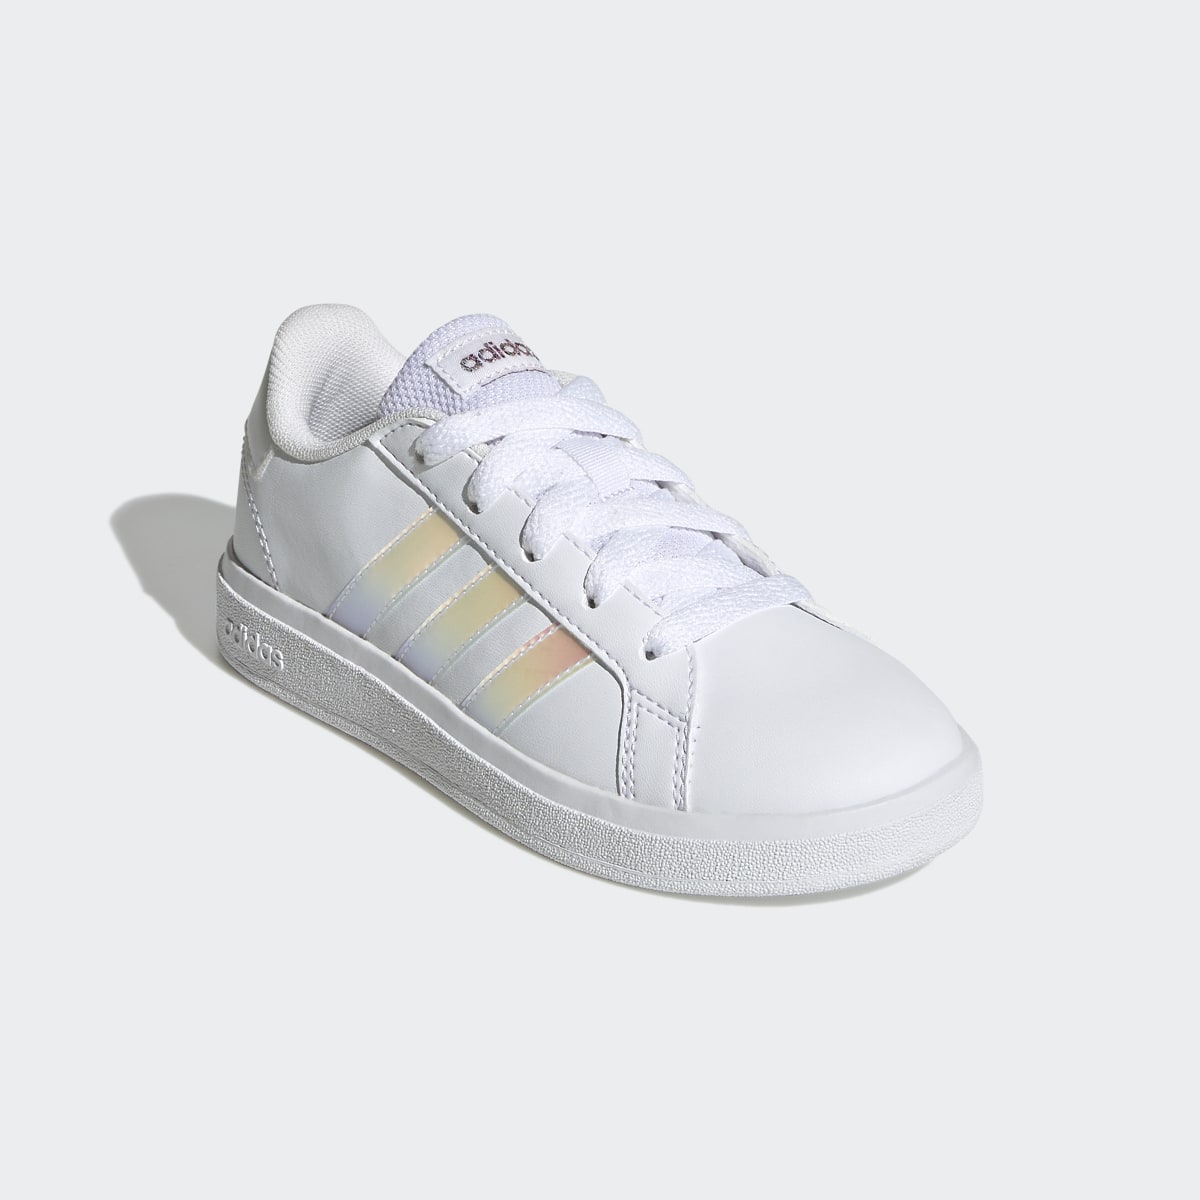 Adidas Grand Court Lifestyle Lace Tennis Schuh. 5